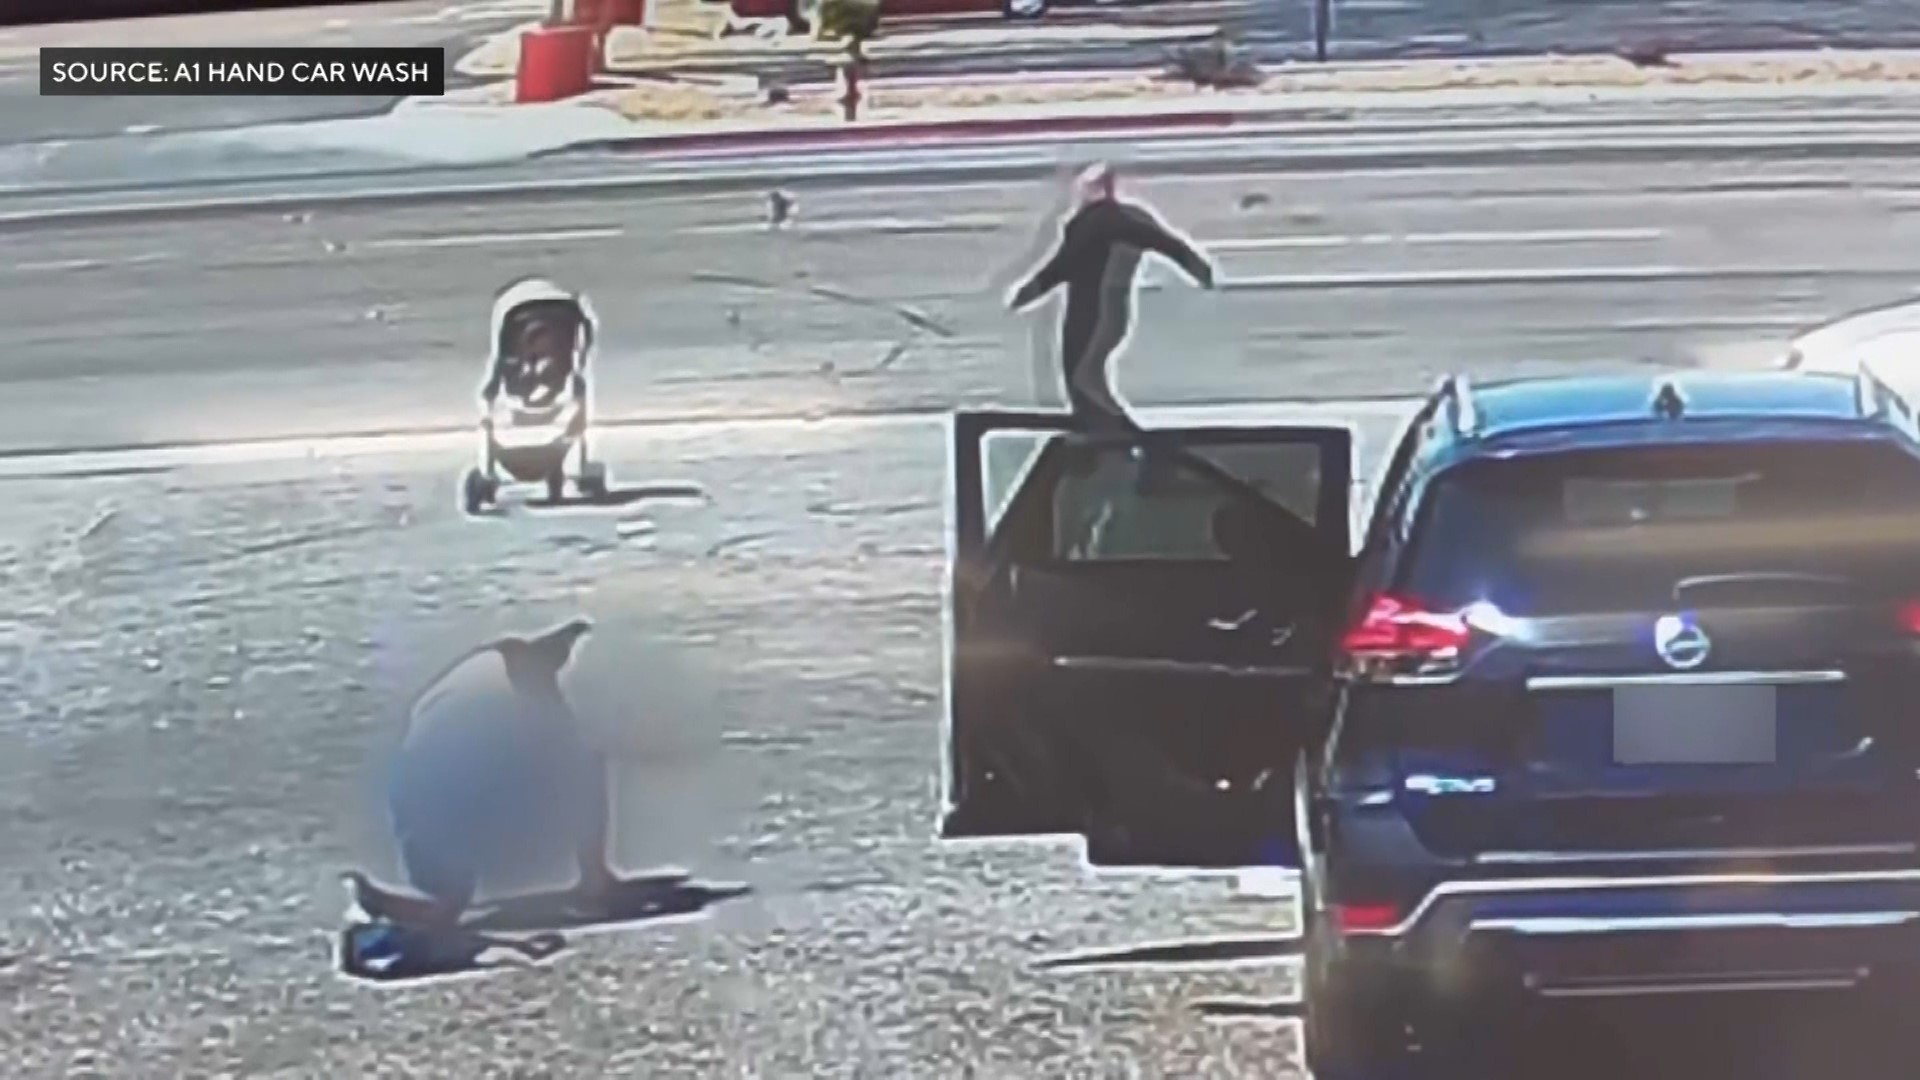 A good Samaritan rescued a baby in a runaway stroller headed for a busy roadway in California.